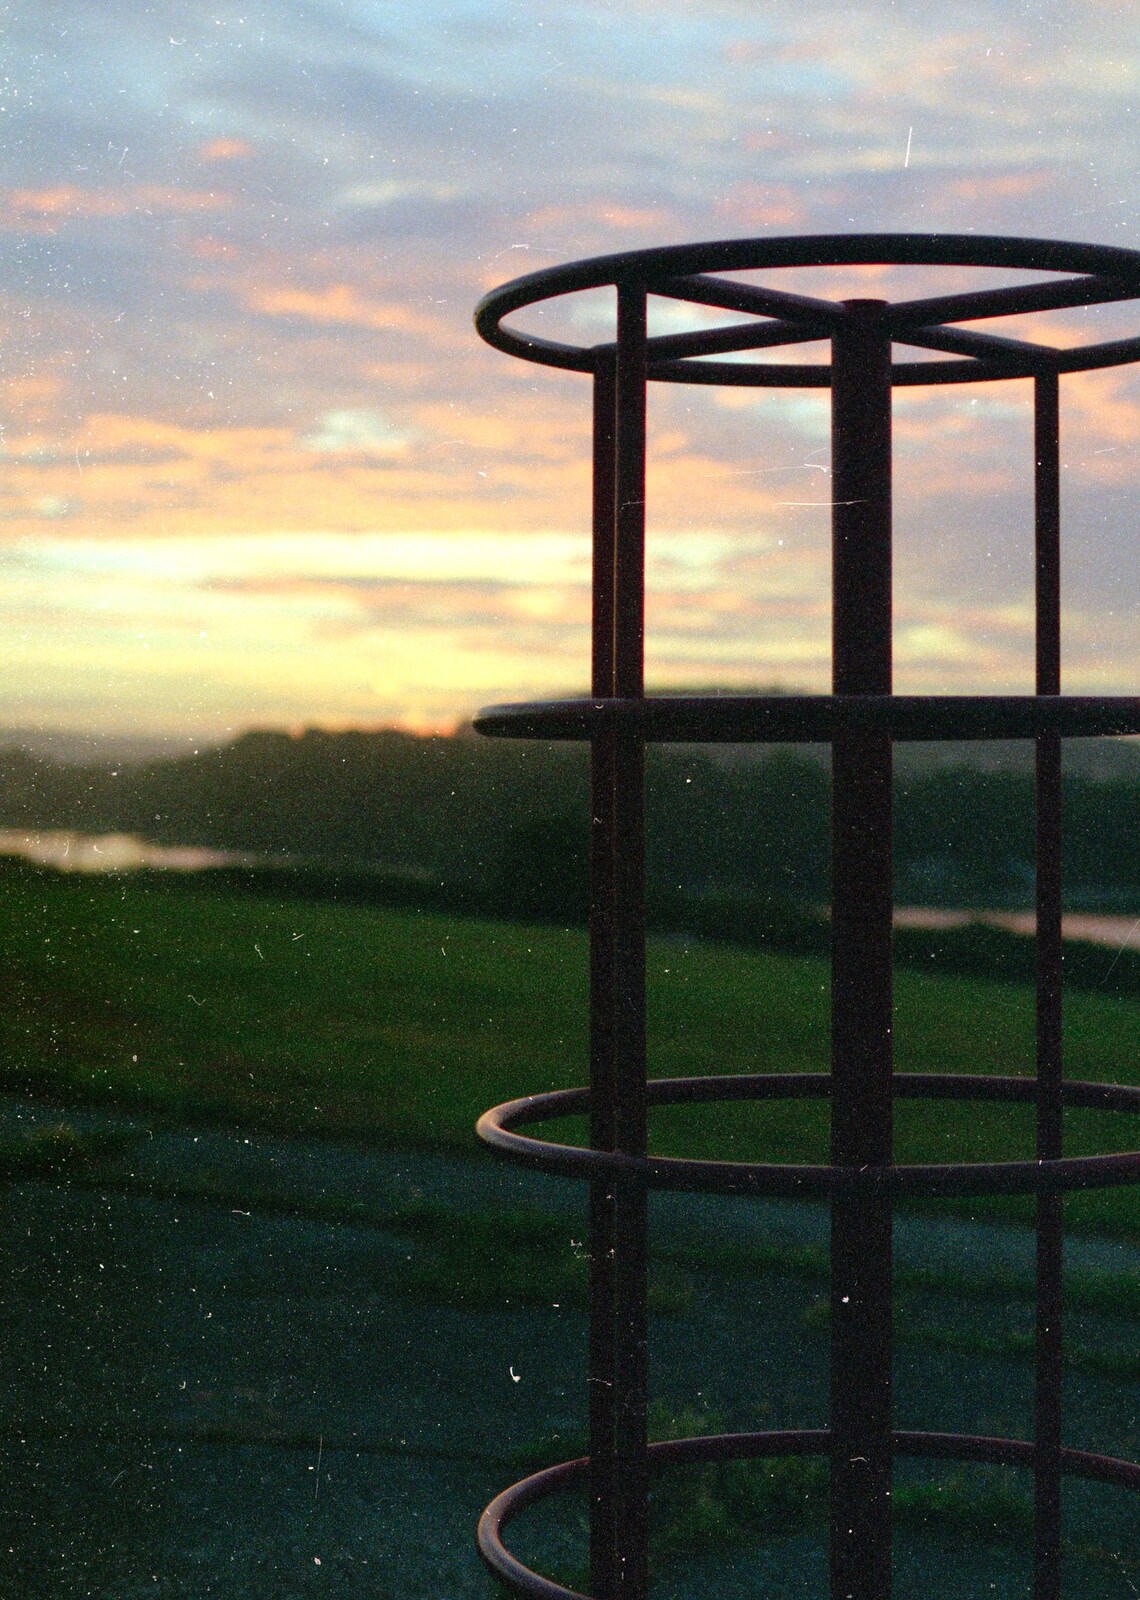 A climbing frame in the sunrise from Uni: A Neath Road Summer, St. Jude's, Plymouth - 18th August 1987